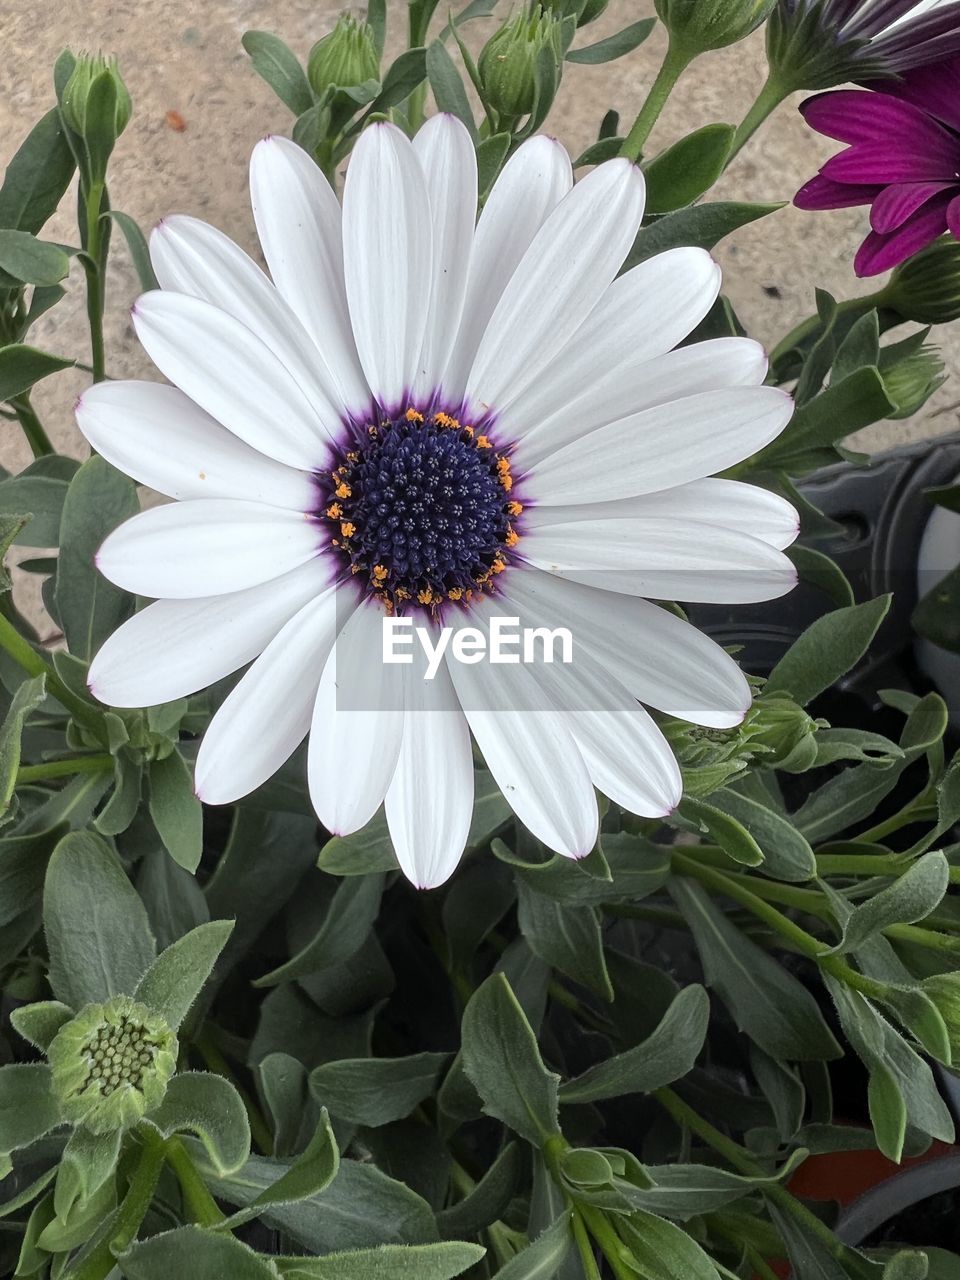 flower, flowering plant, plant, beauty in nature, freshness, growth, petal, flower head, inflorescence, fragility, nature, pollen, close-up, daisy, osteospermum, leaf, plant part, white, botany, no people, high angle view, day, outdoors, green